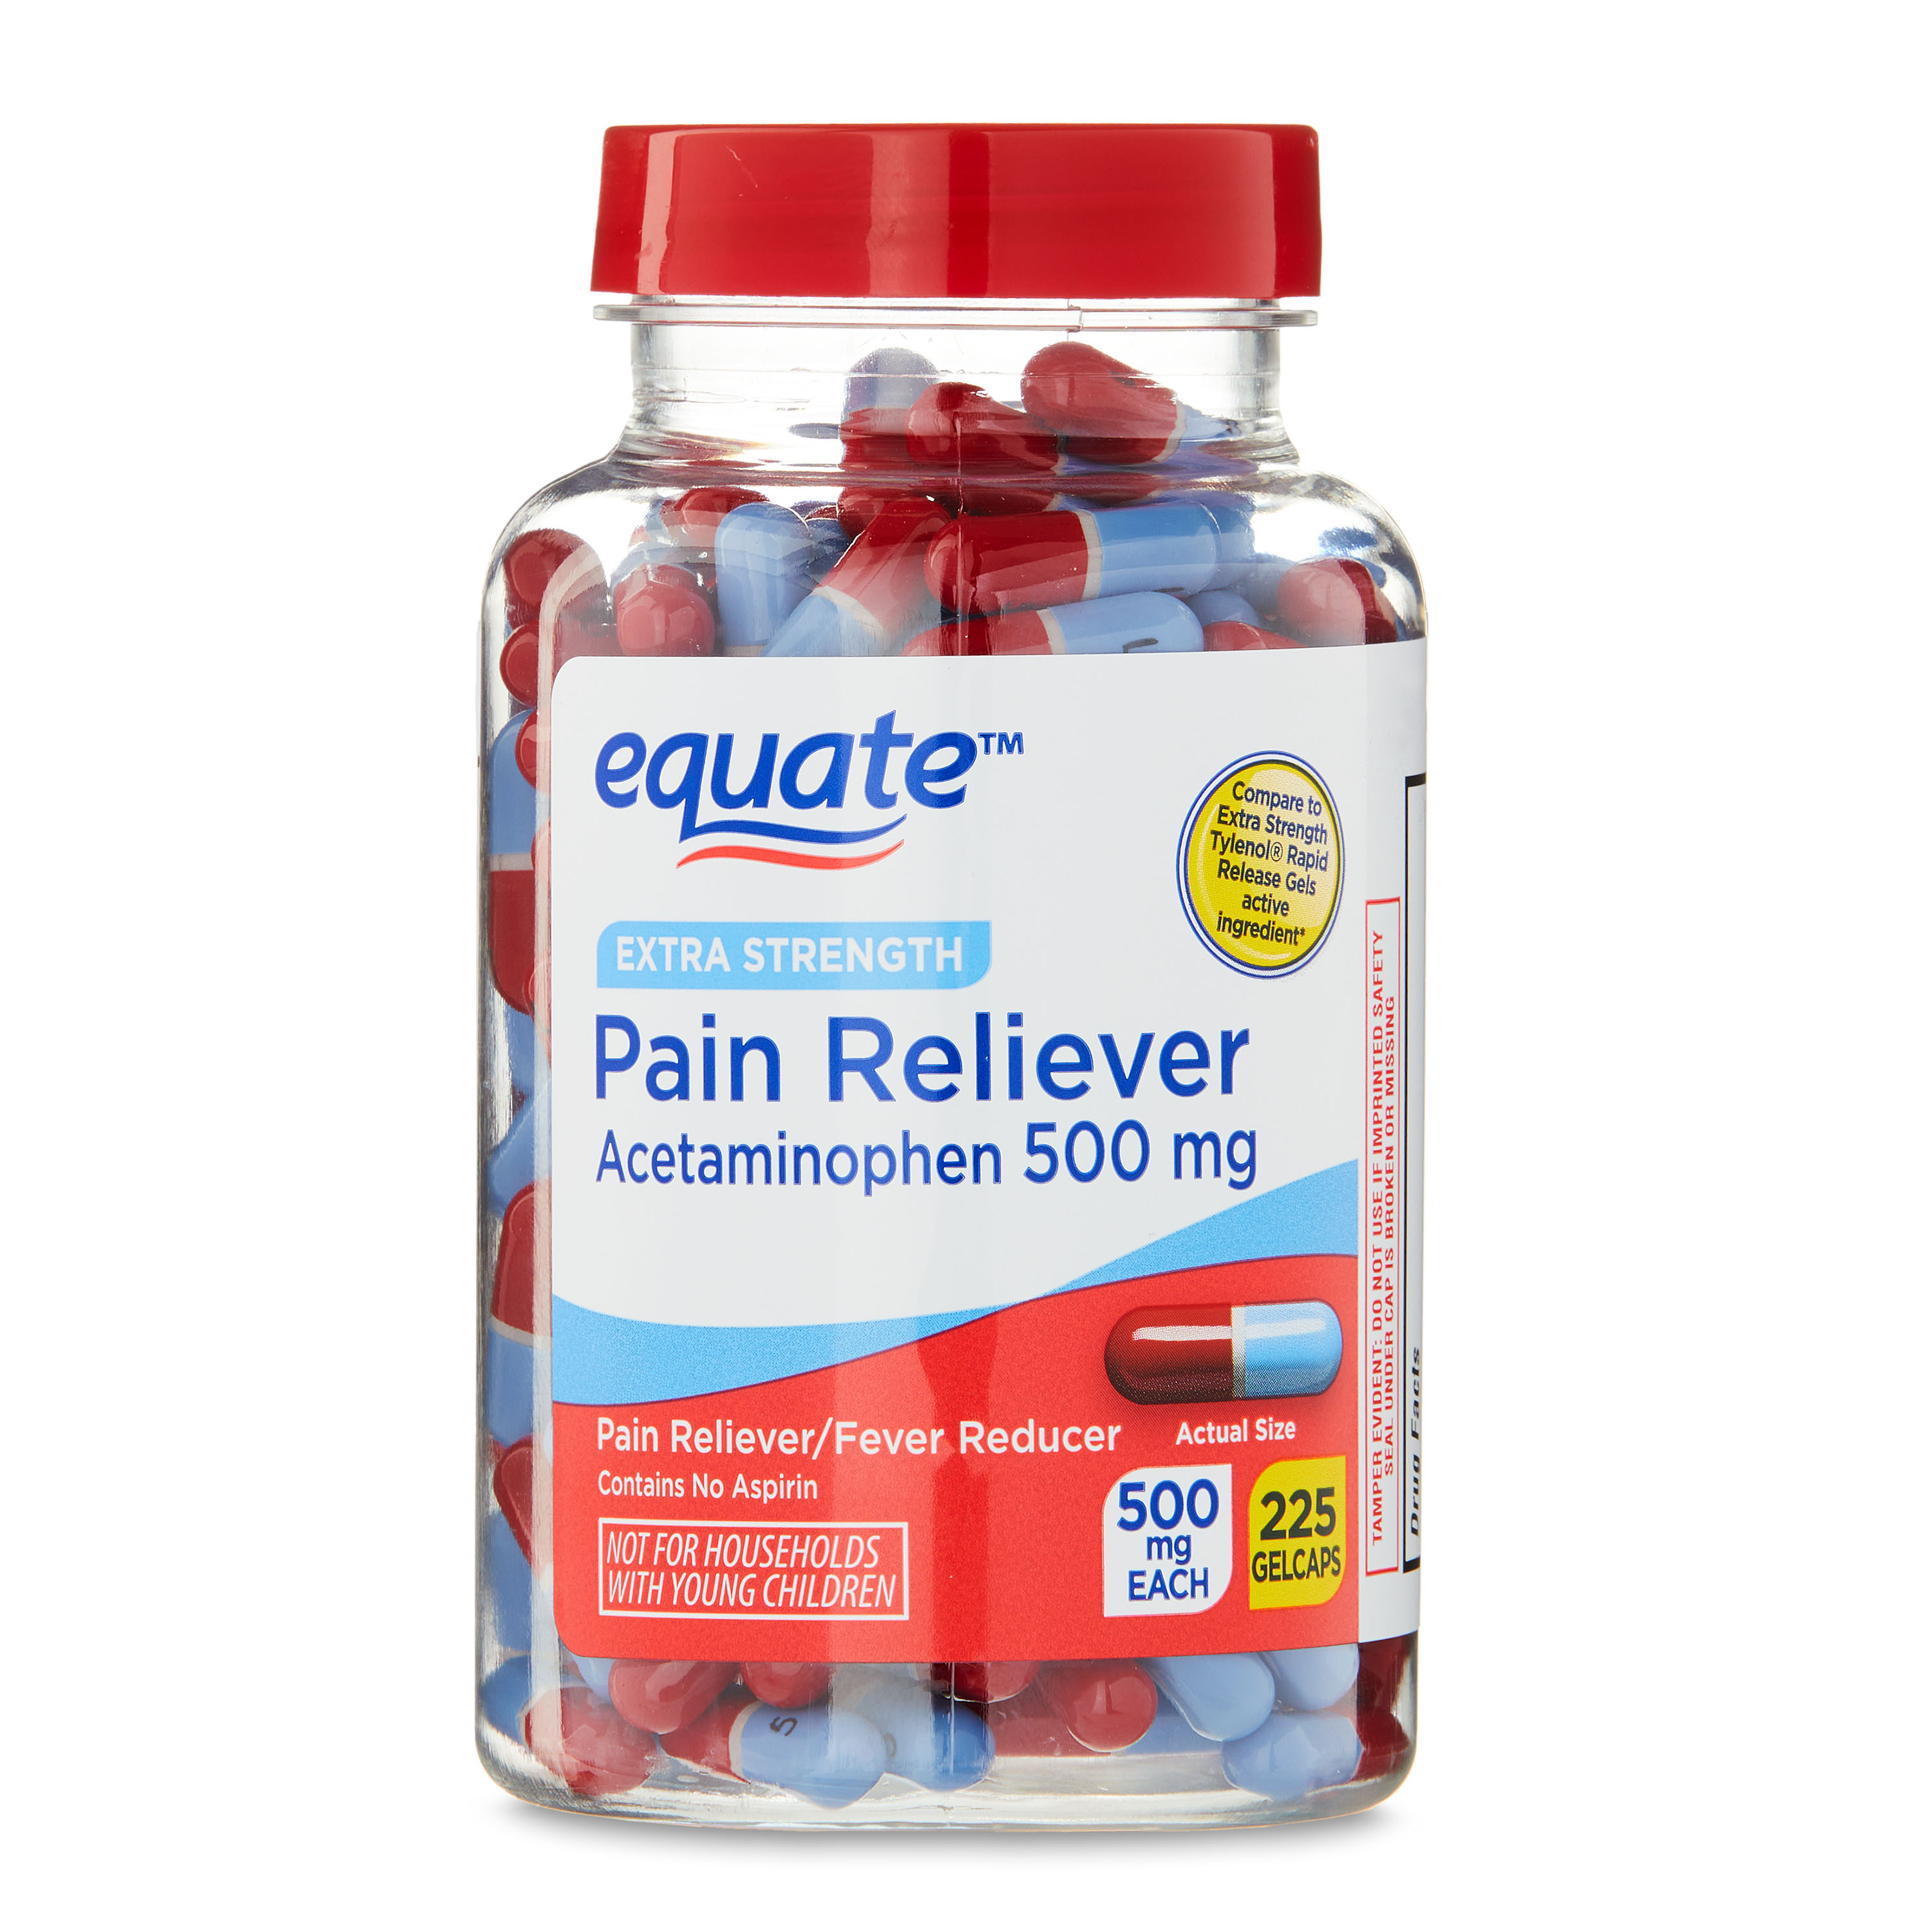 Equate Extra Strength Acetaminophen Pain Reliever Gelcaps, 500 mg, 225 Count - image 1 of 9